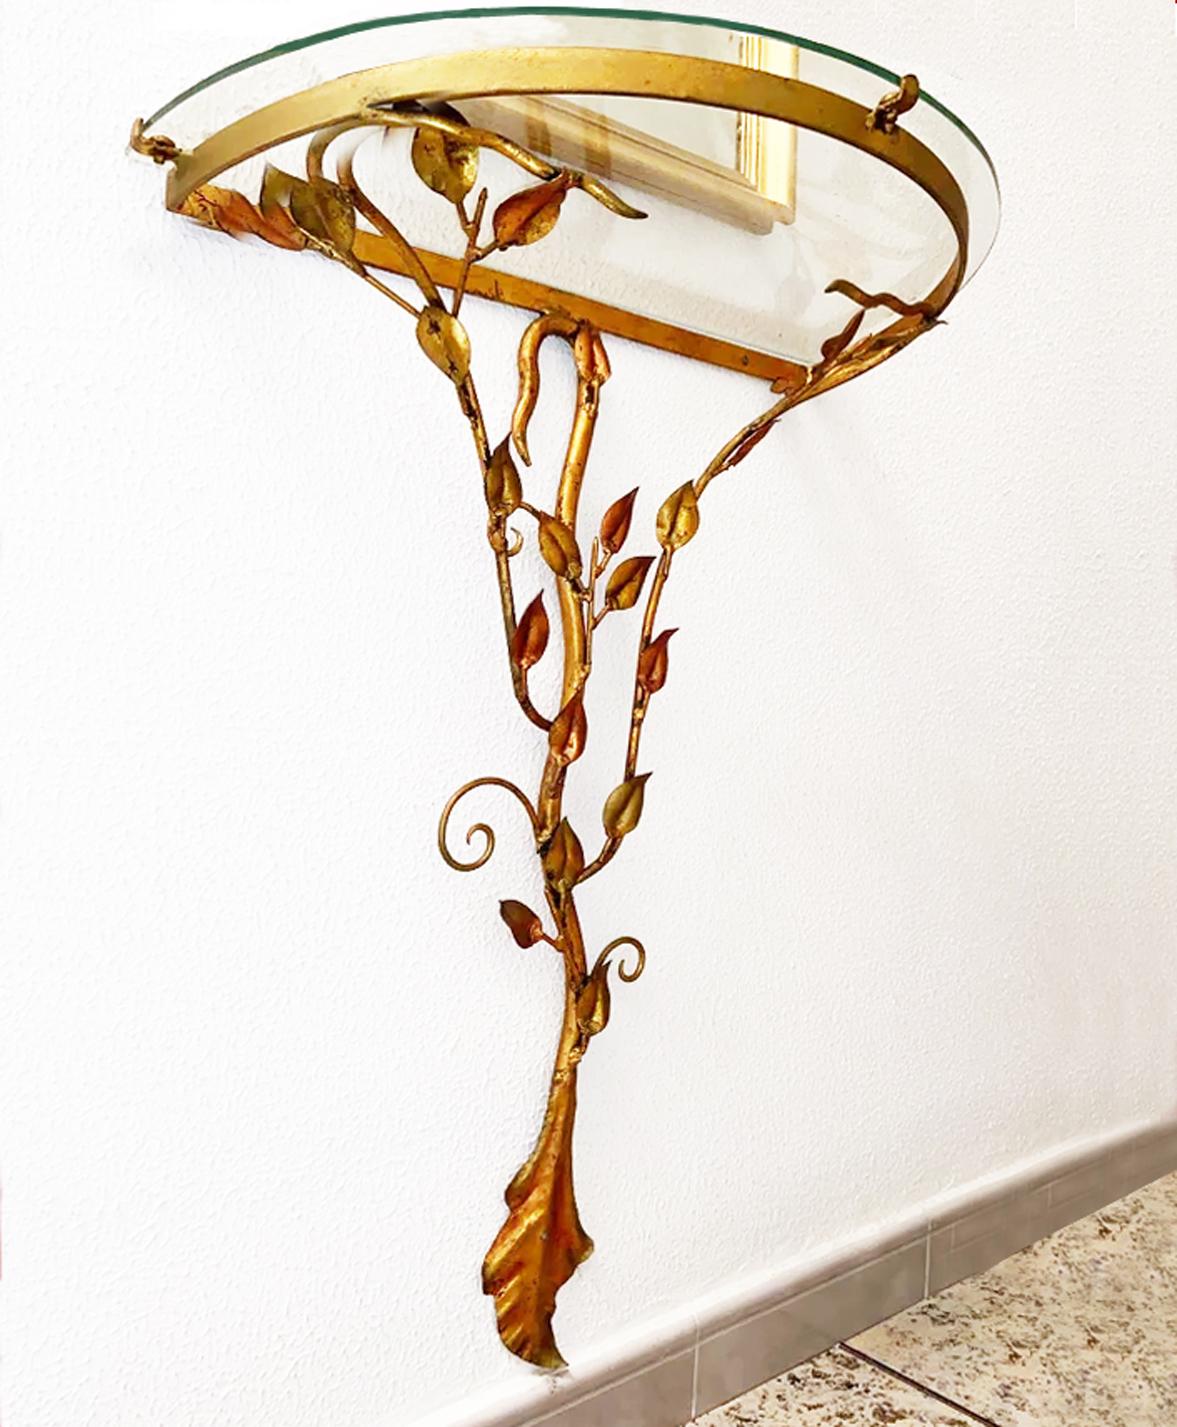 Wall Mount Console Table Mid Century Iron Leaves Gold Leaf, France 50s to 70s
Hollewood Regency.
iton forged golden
Mid 20th Century Furniture.